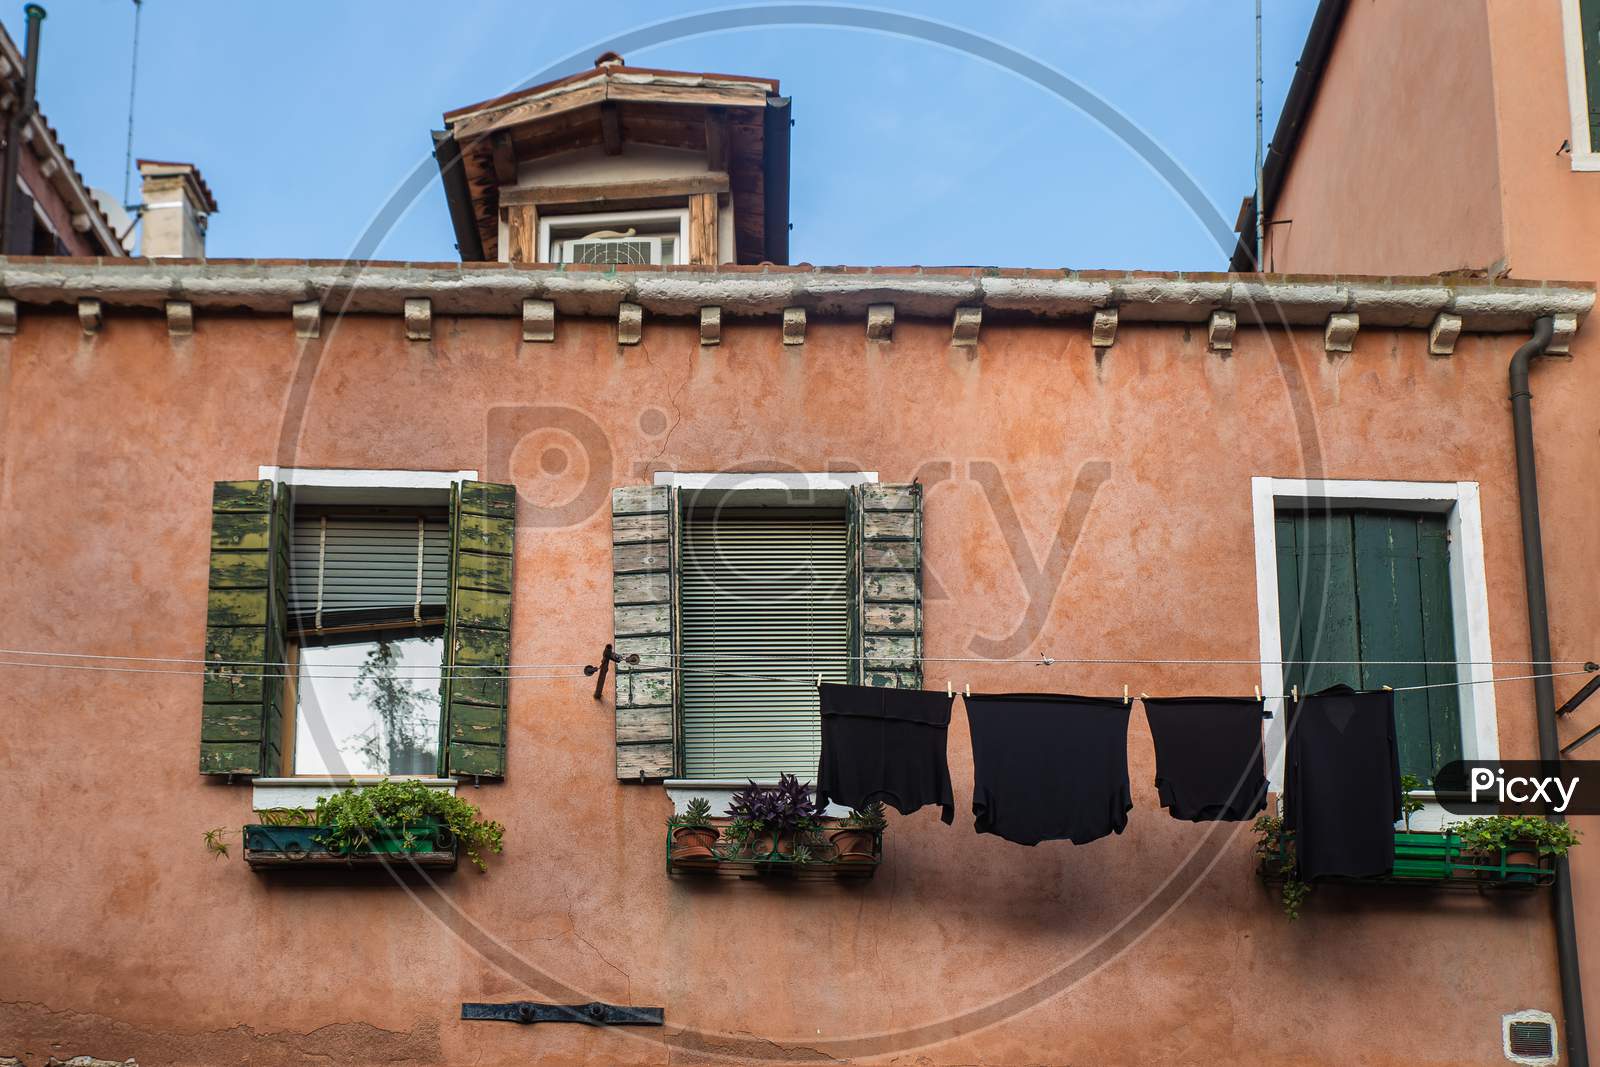 Laundry Hanging Over A Rope In A Traditional Italian European House - Venice